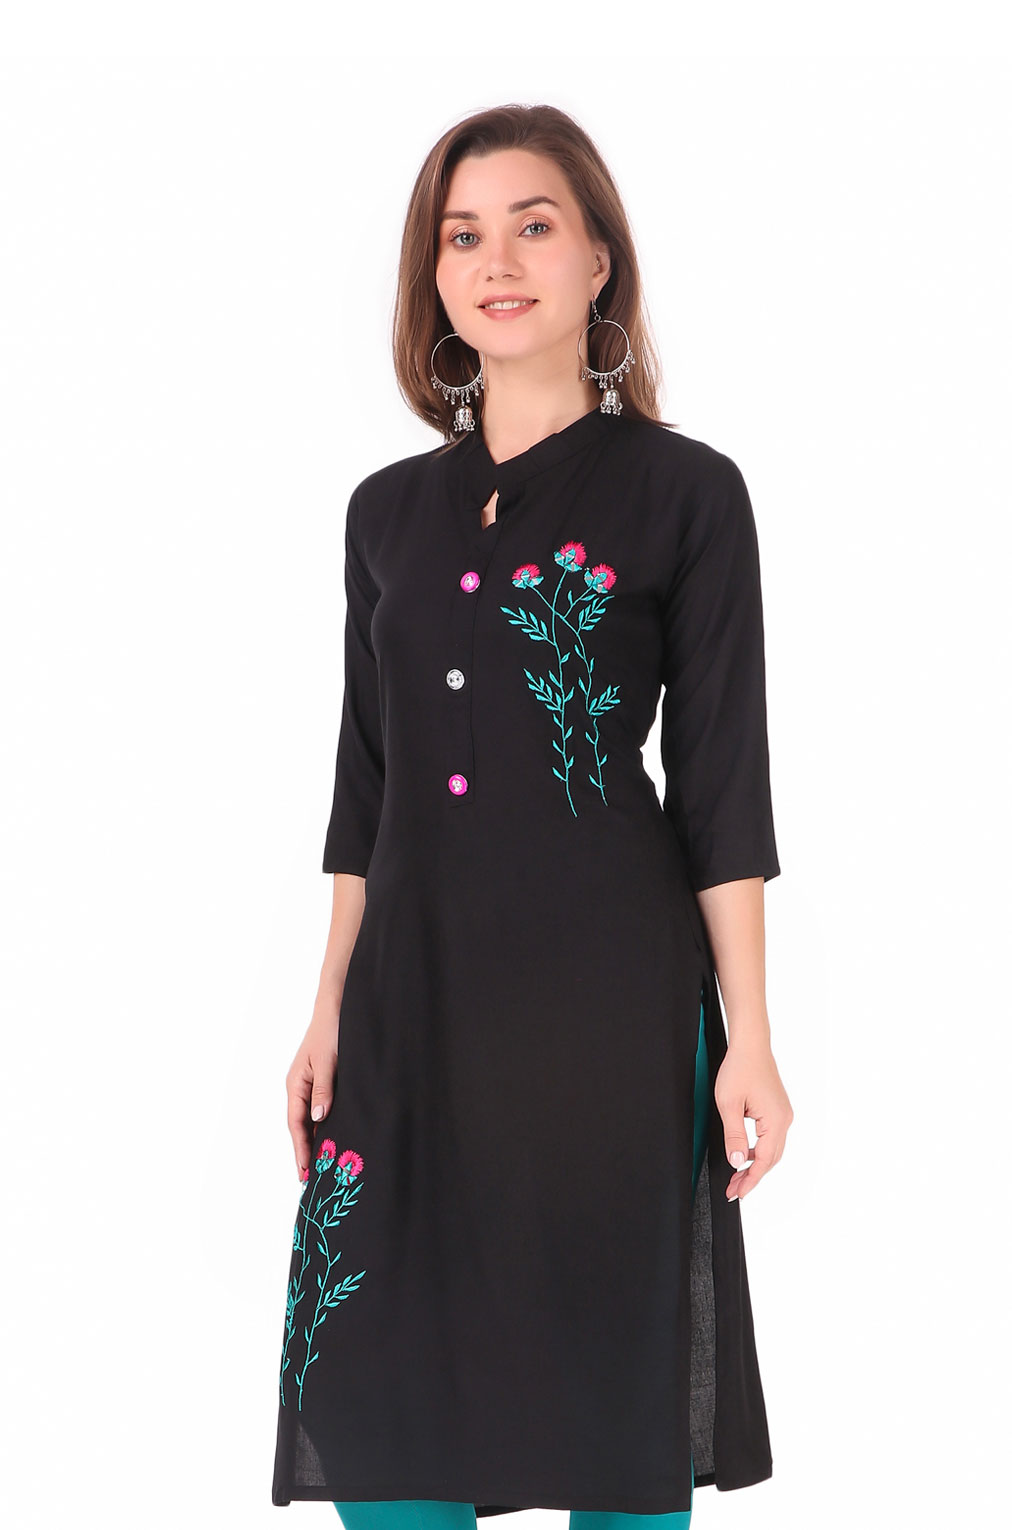 Indian Traditional Kurti With Flower Design Pattern Stock Photo - Download  Image Now - iStock